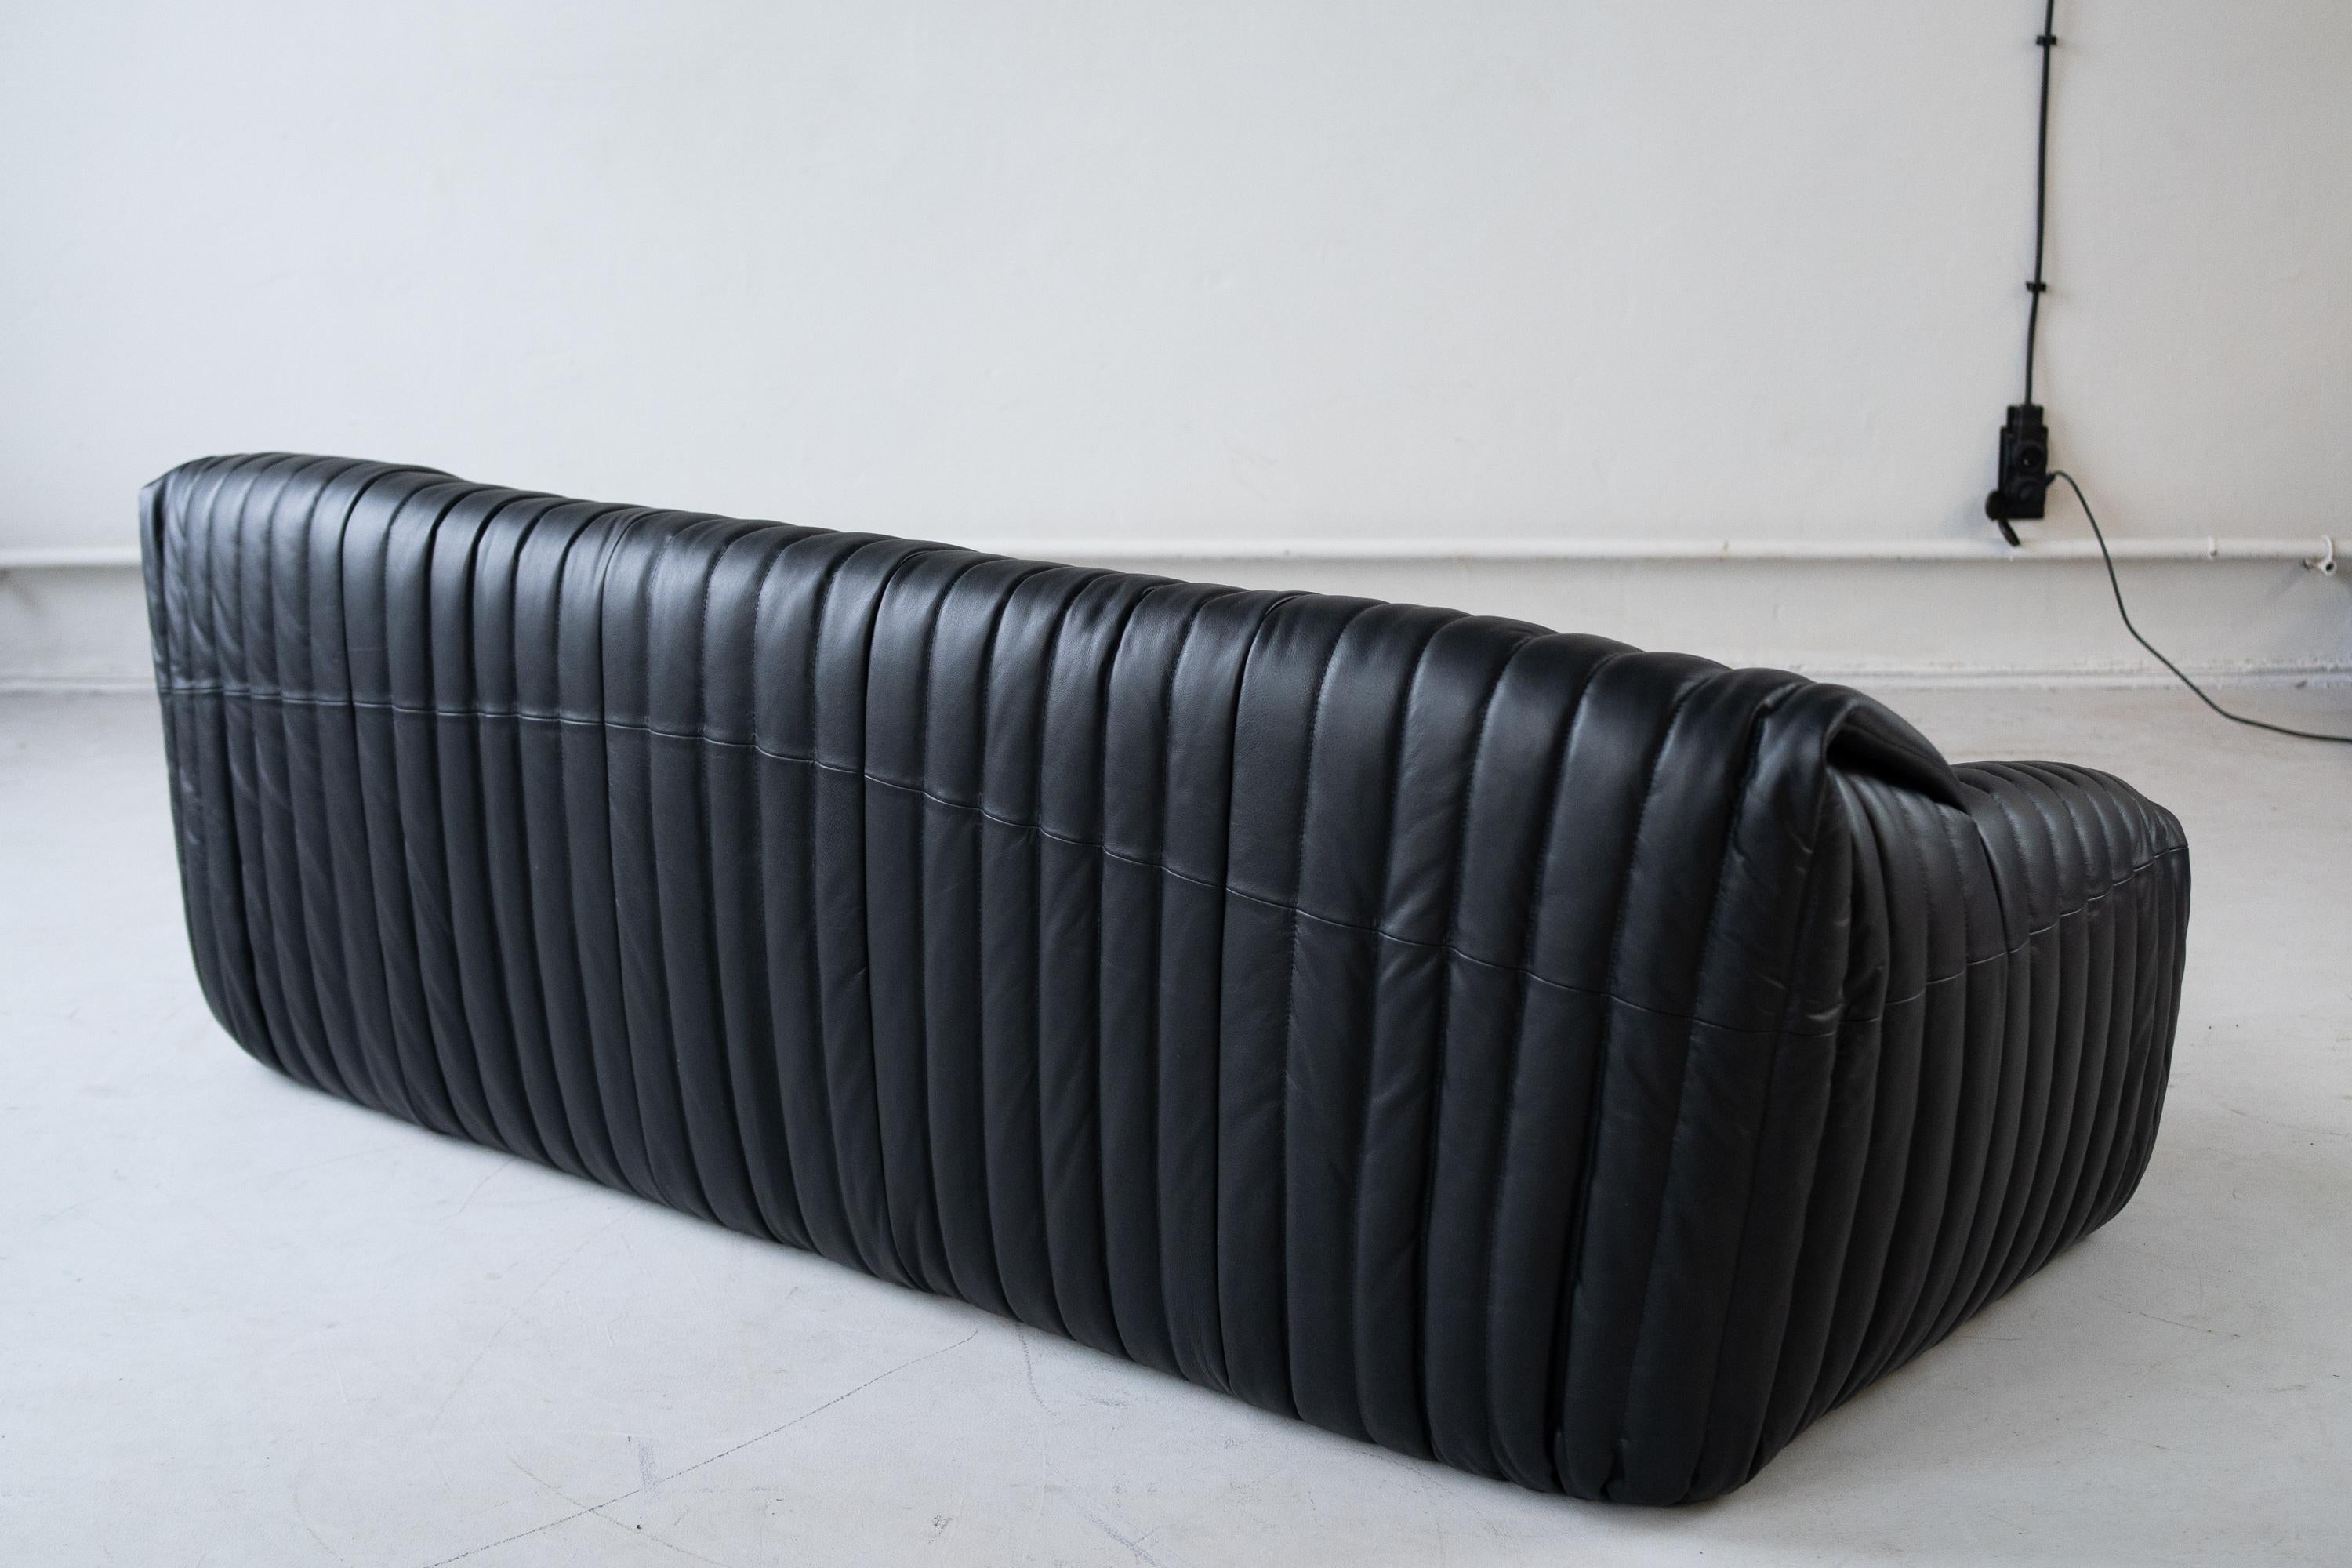  Sandra sofa  designed by Annie Hiéronimus for Cinna after she joined the Roset Bureau d’Etudes in 1976. 
 The inside of the sofa consists entirely of polyether foam and is, therefore, feather-light and above all very comfortable. 
This set is